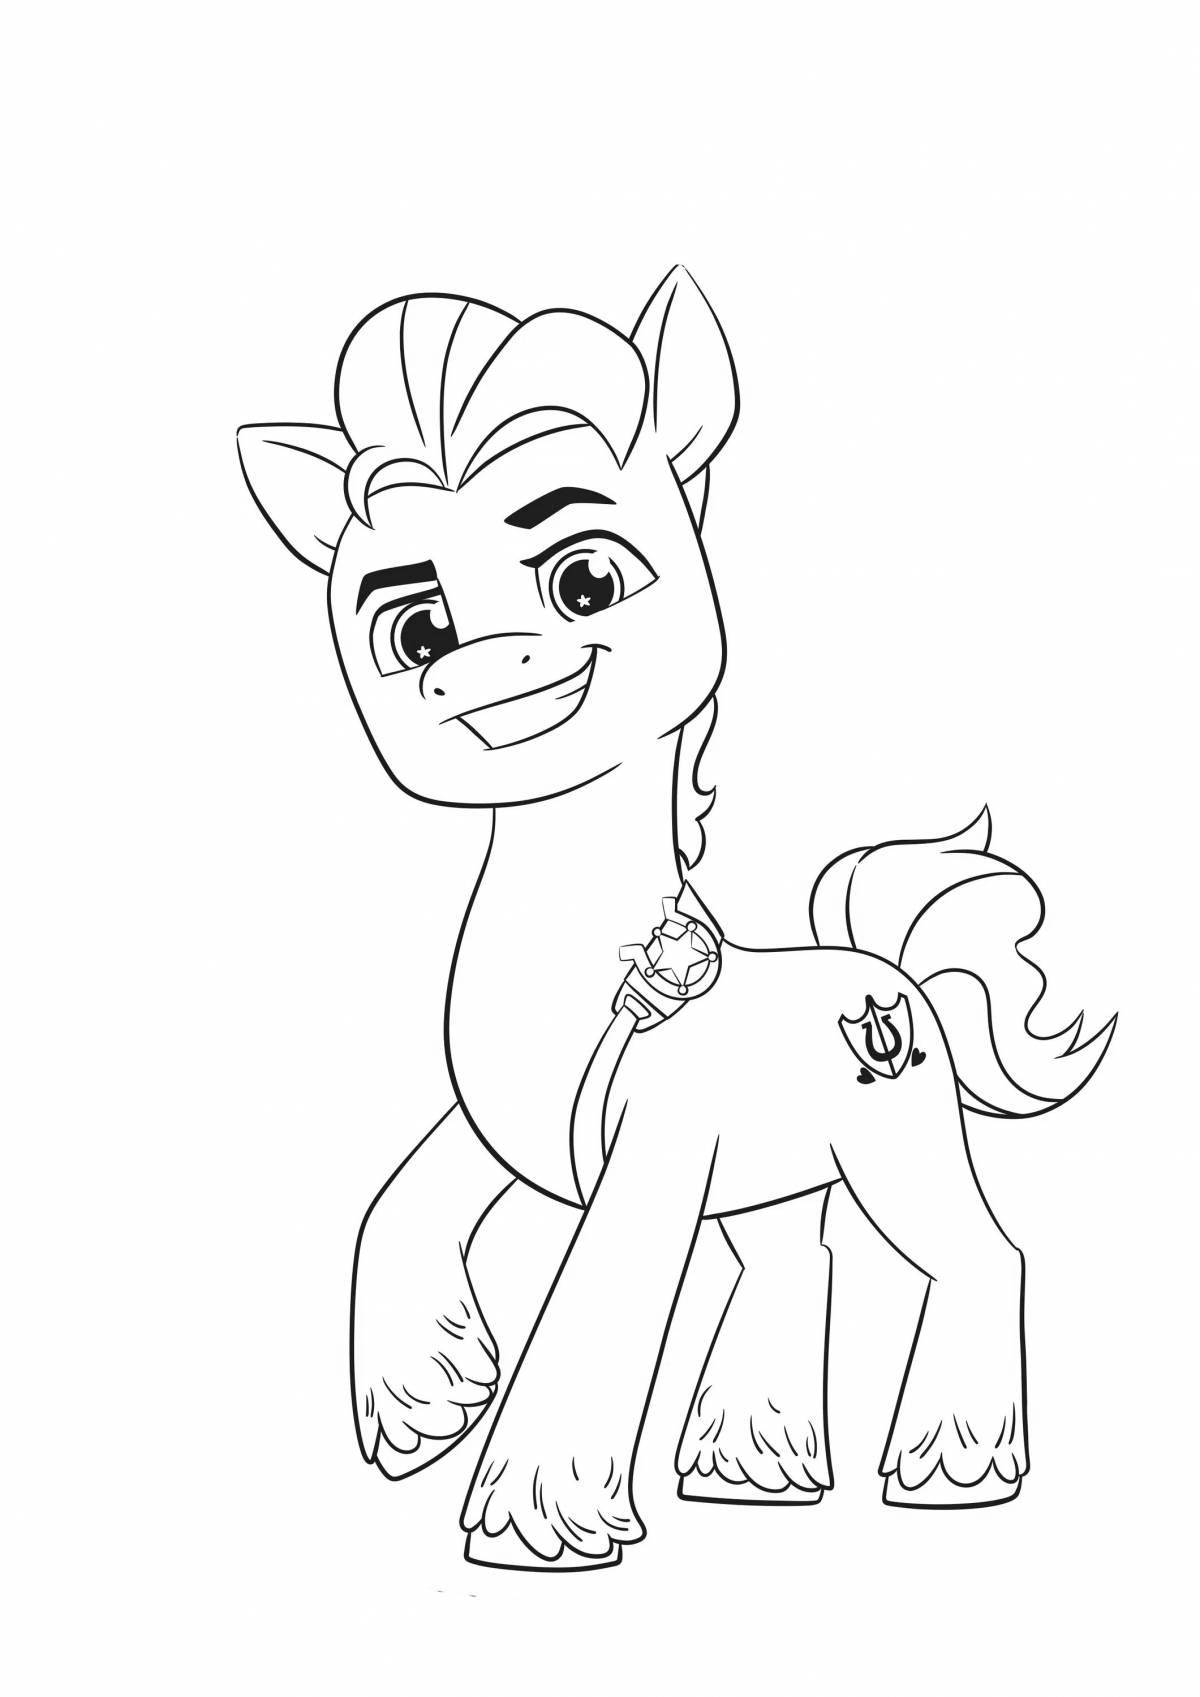 Fun easy pony coloring page